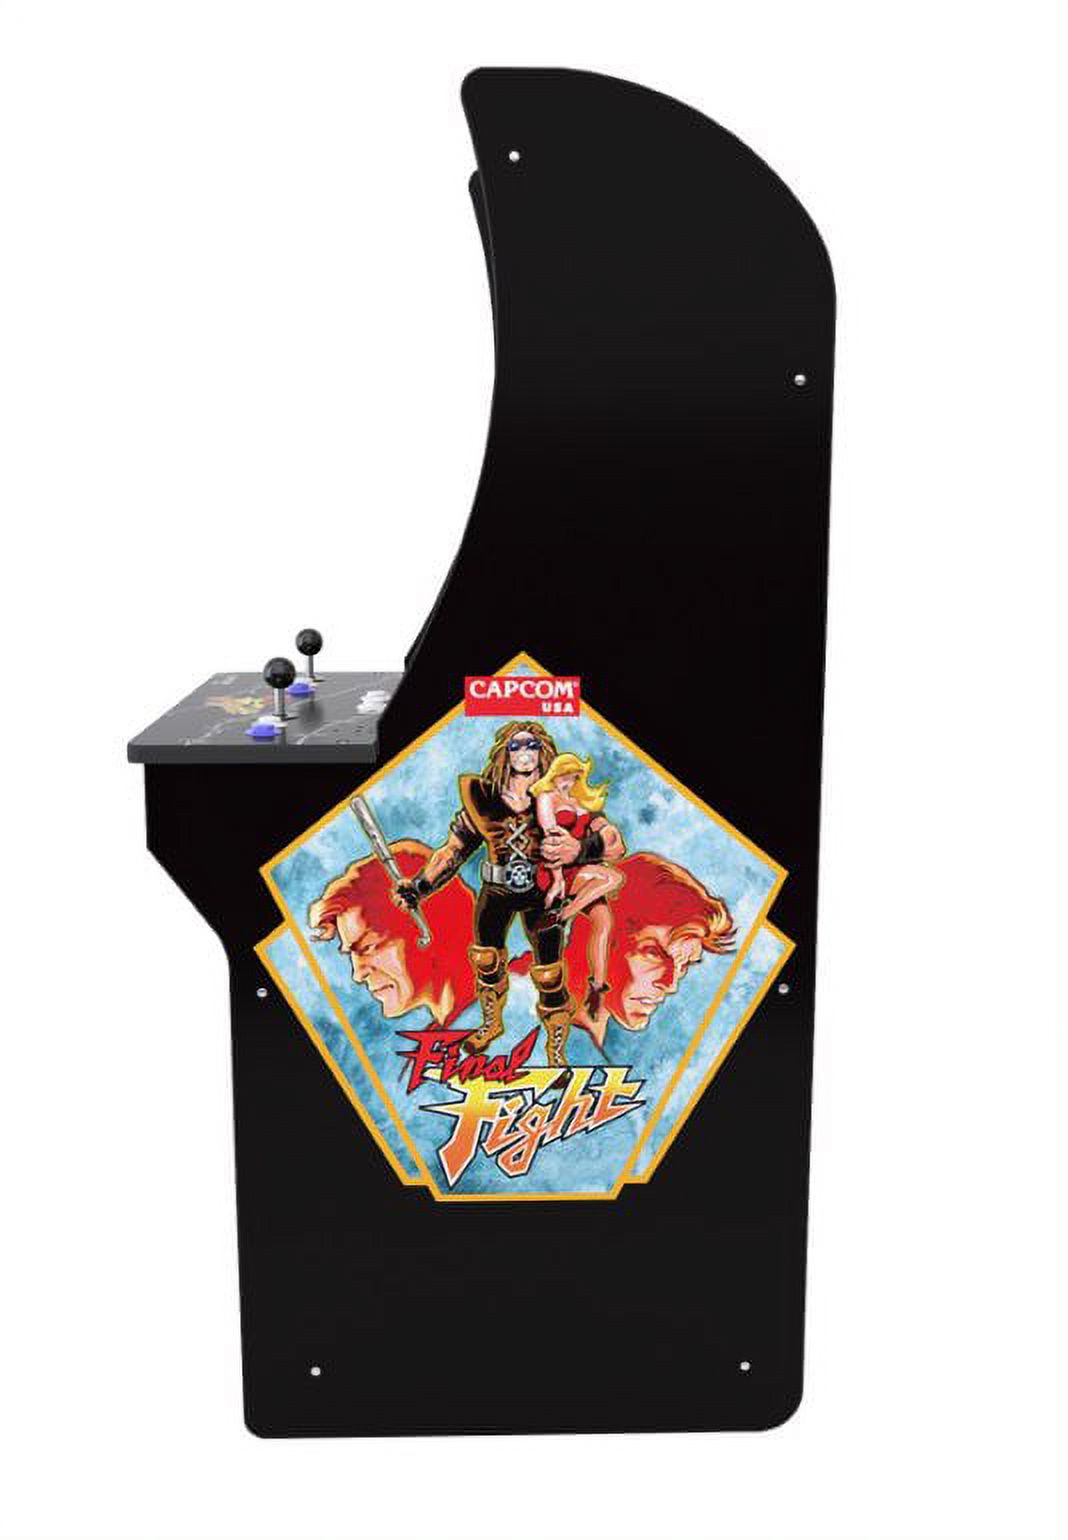 Arcade1Up, Final Fight Arcade Machine without riser - image 3 of 5